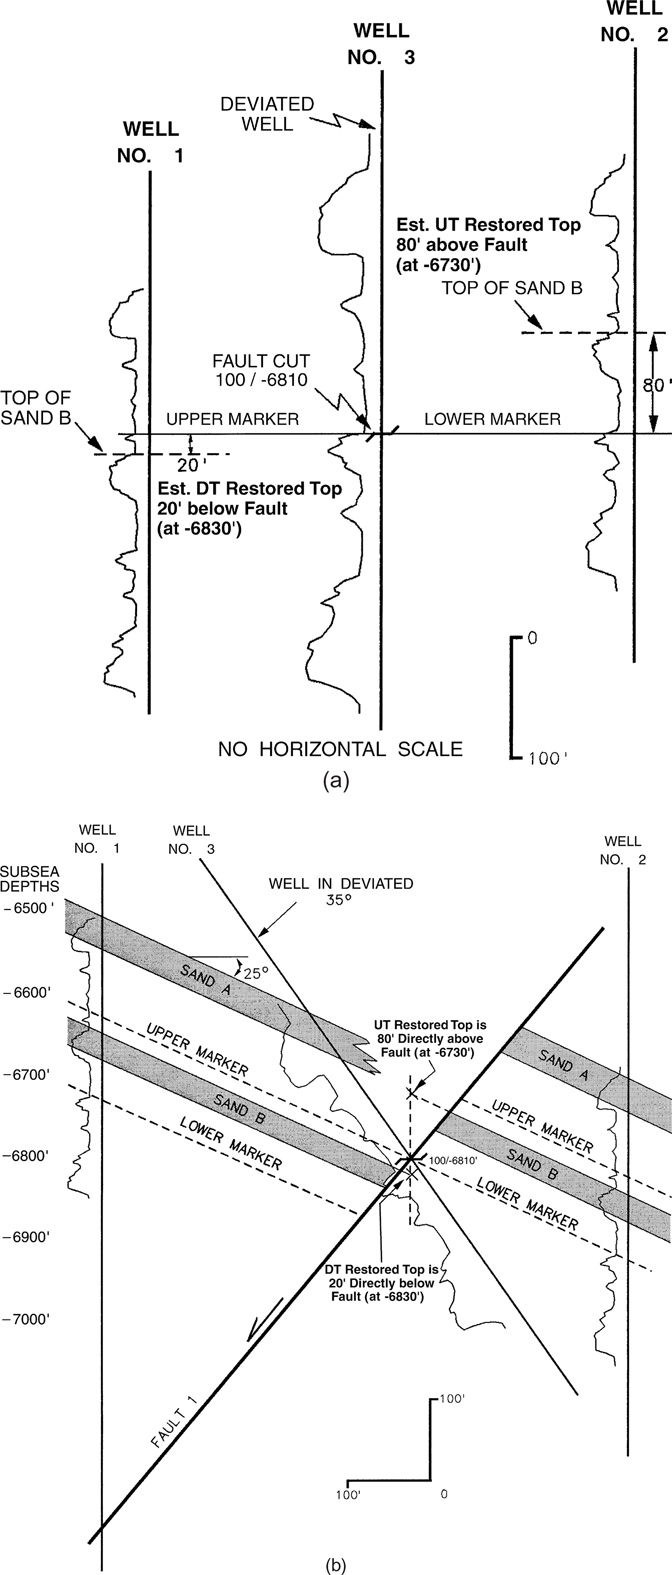 Two figures demonstrate the method of estimating restored tops in deviated well logs.